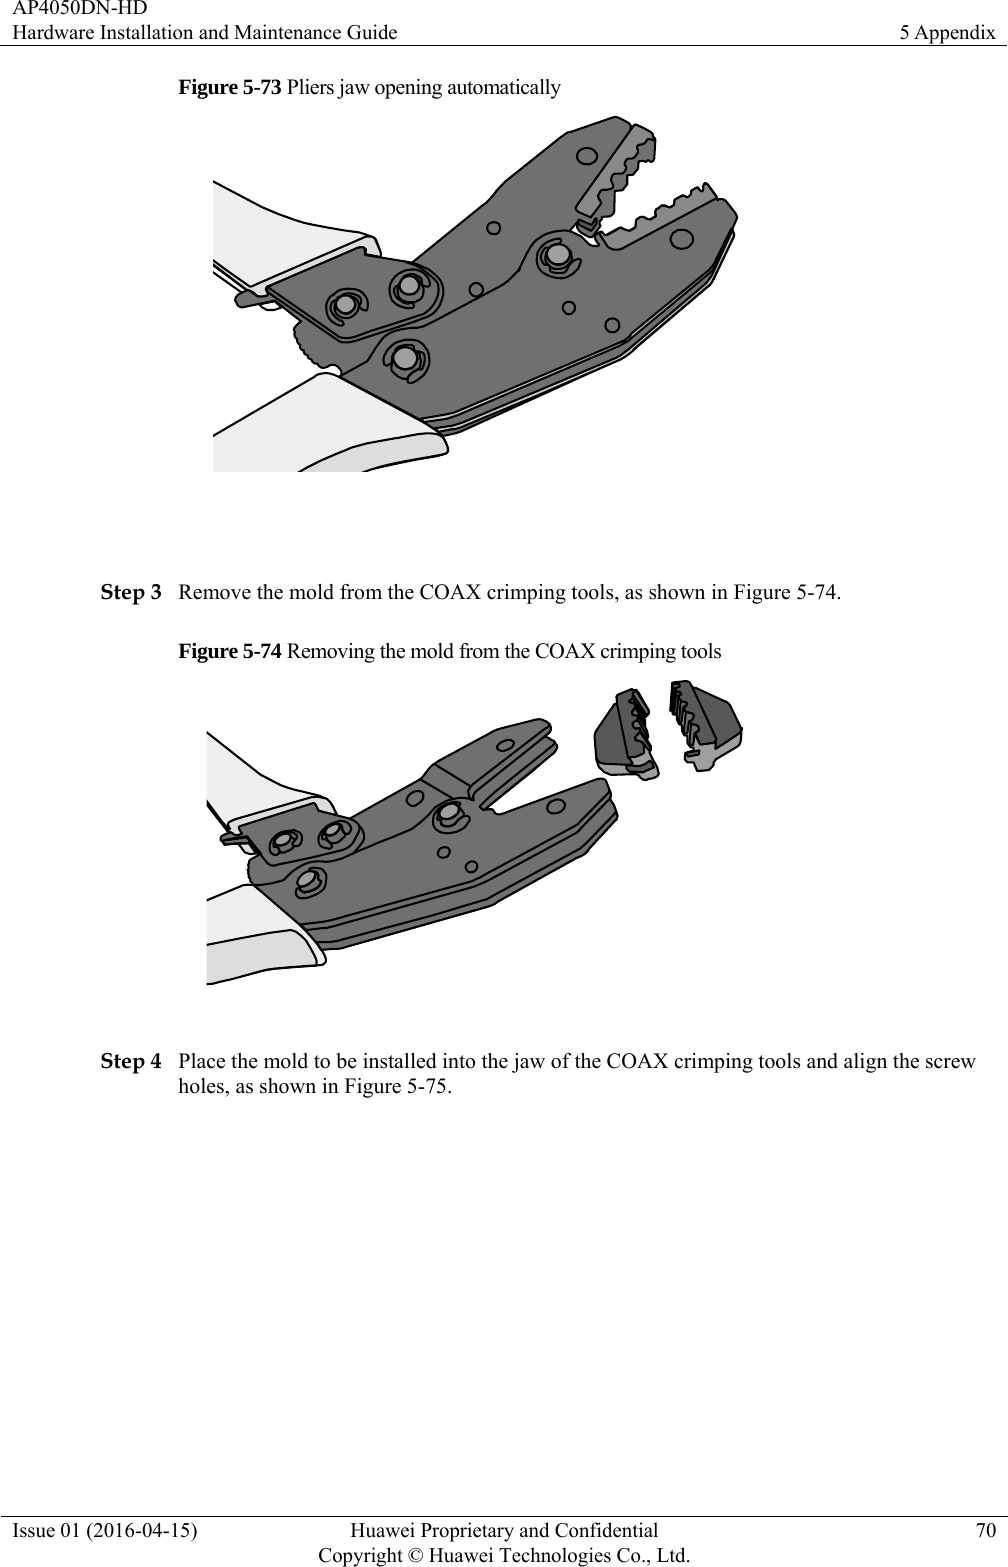 AP4050DN-HD Hardware Installation and Maintenance Guide  5 Appendix Issue 01 (2016-04-15)  Huawei Proprietary and Confidential         Copyright © Huawei Technologies Co., Ltd.70 Figure 5-73 Pliers jaw opening automatically   Step 3 Remove the mold from the COAX crimping tools, as shown in Figure 5-74. Figure 5-74 Removing the mold from the COAX crimping tools   Step 4 Place the mold to be installed into the jaw of the COAX crimping tools and align the screw holes, as shown in Figure 5-75. 